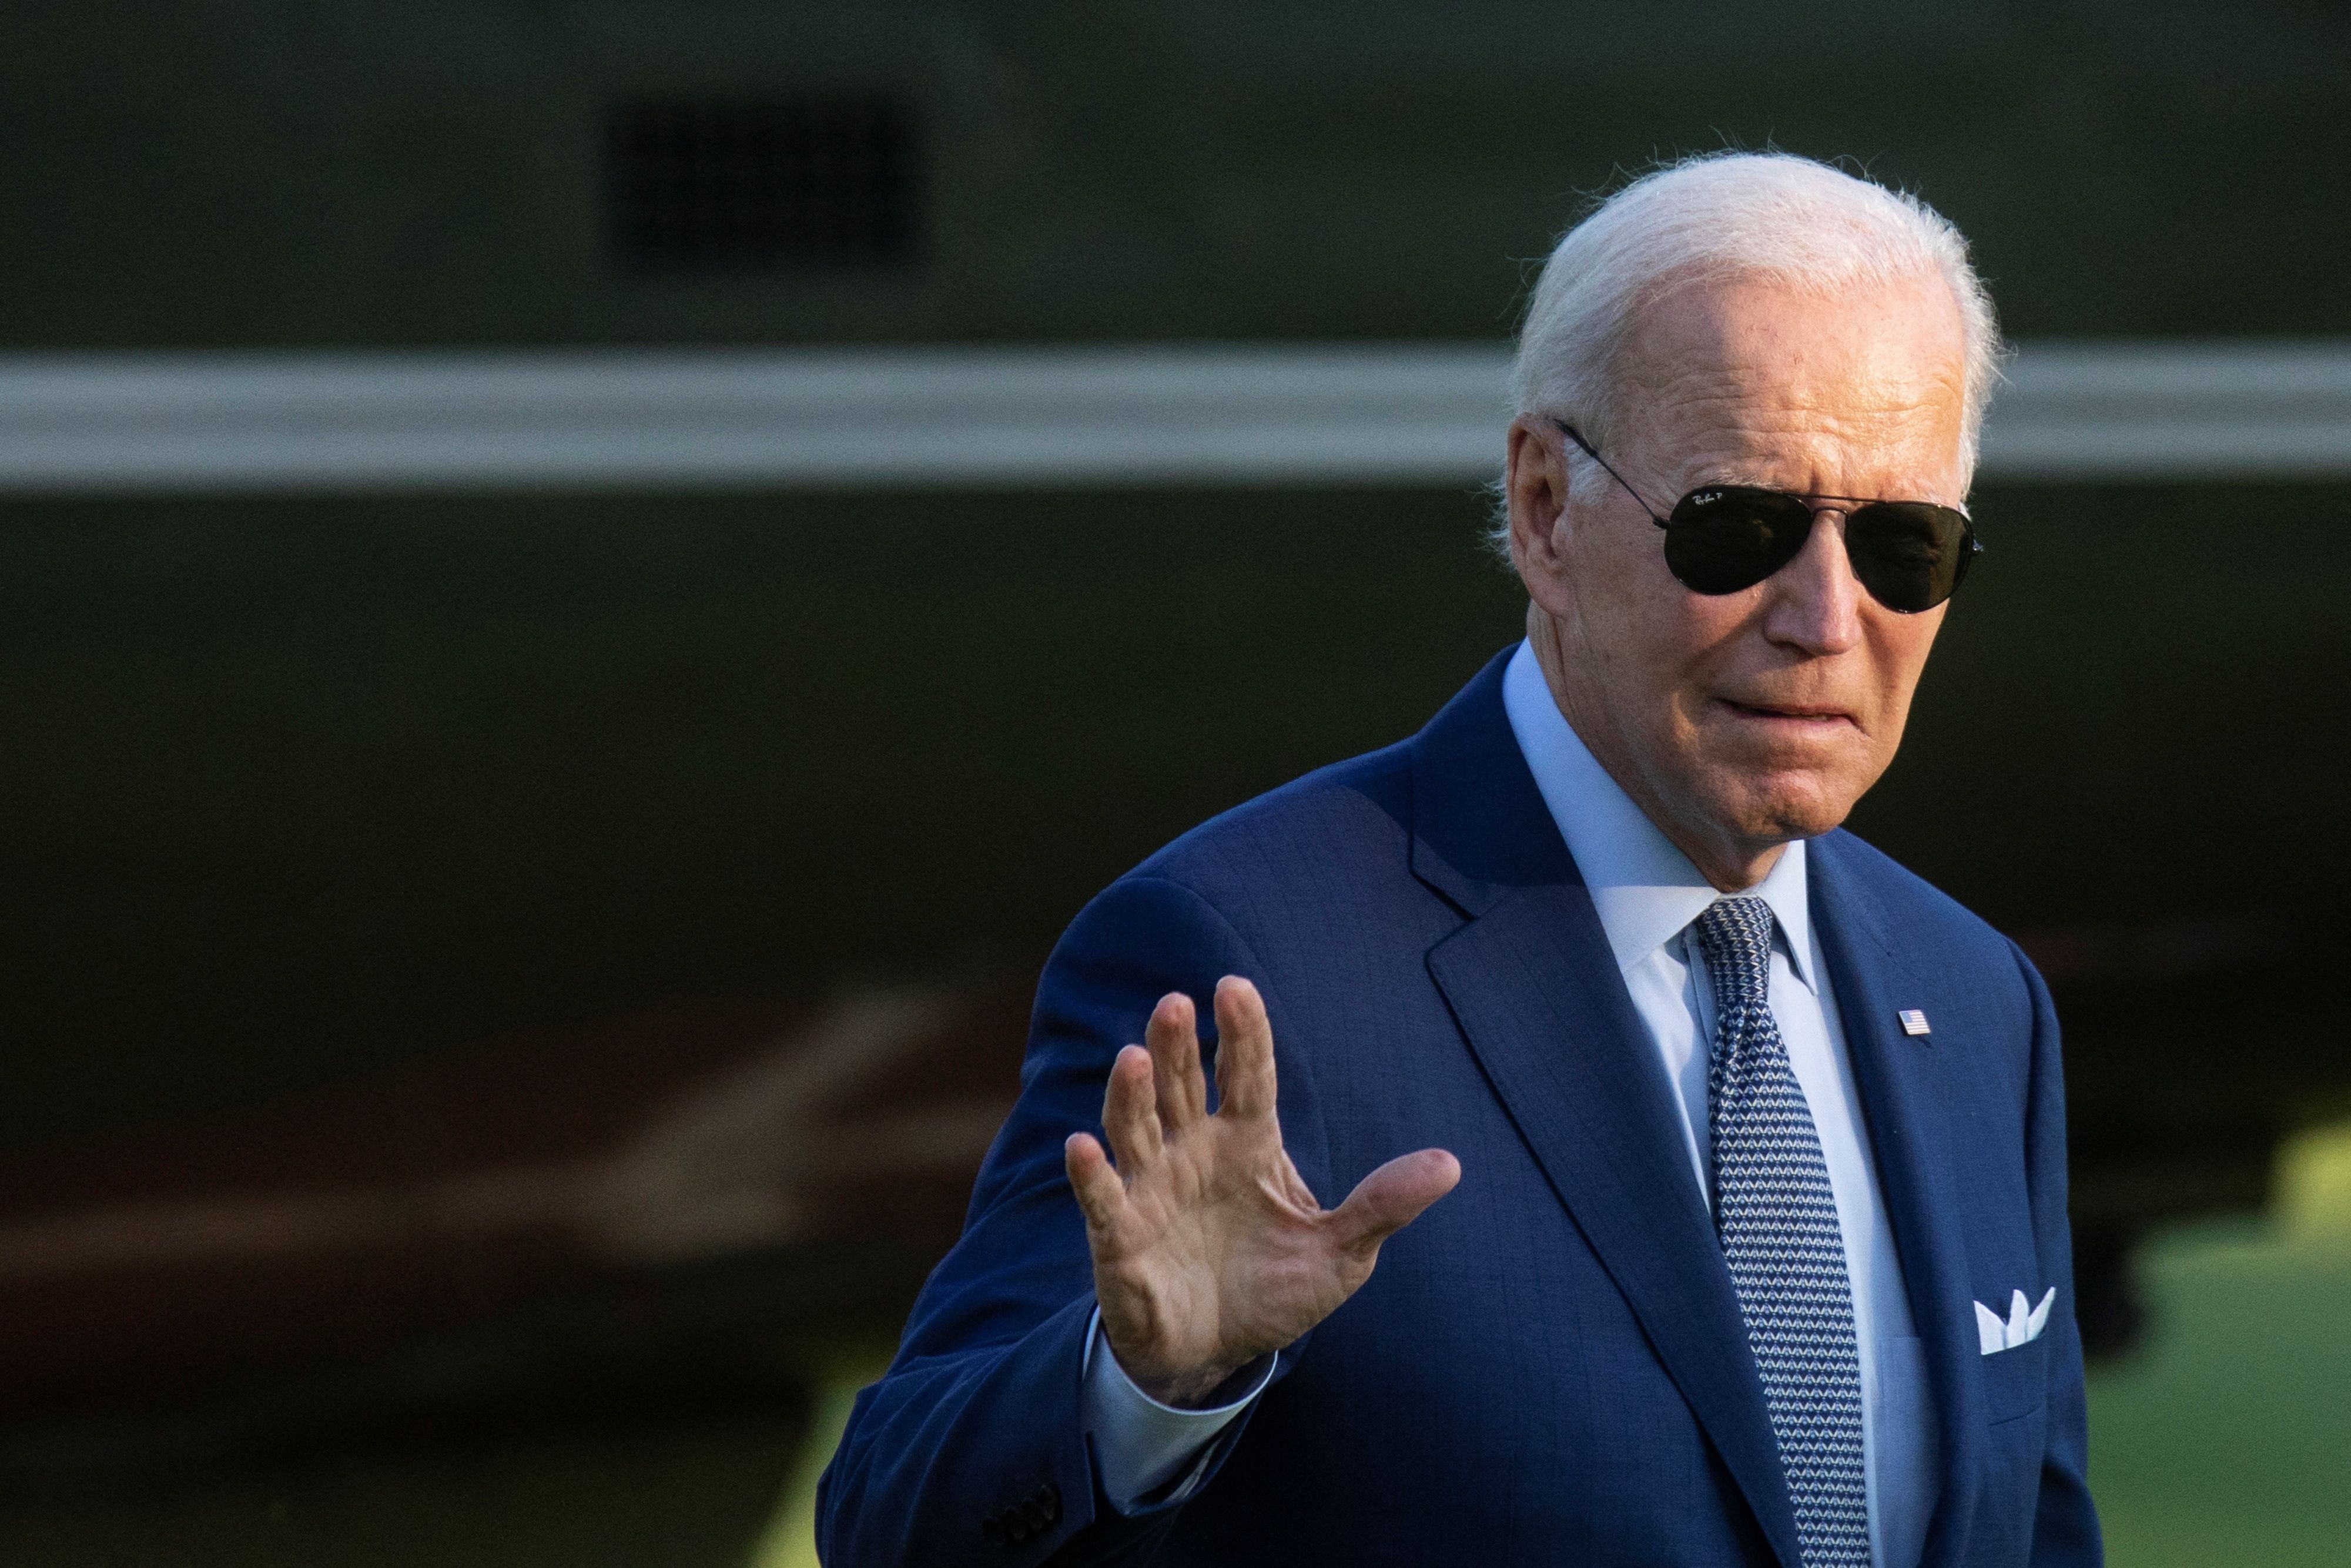 Biden's approval rating sees a jump ahead of November midterms